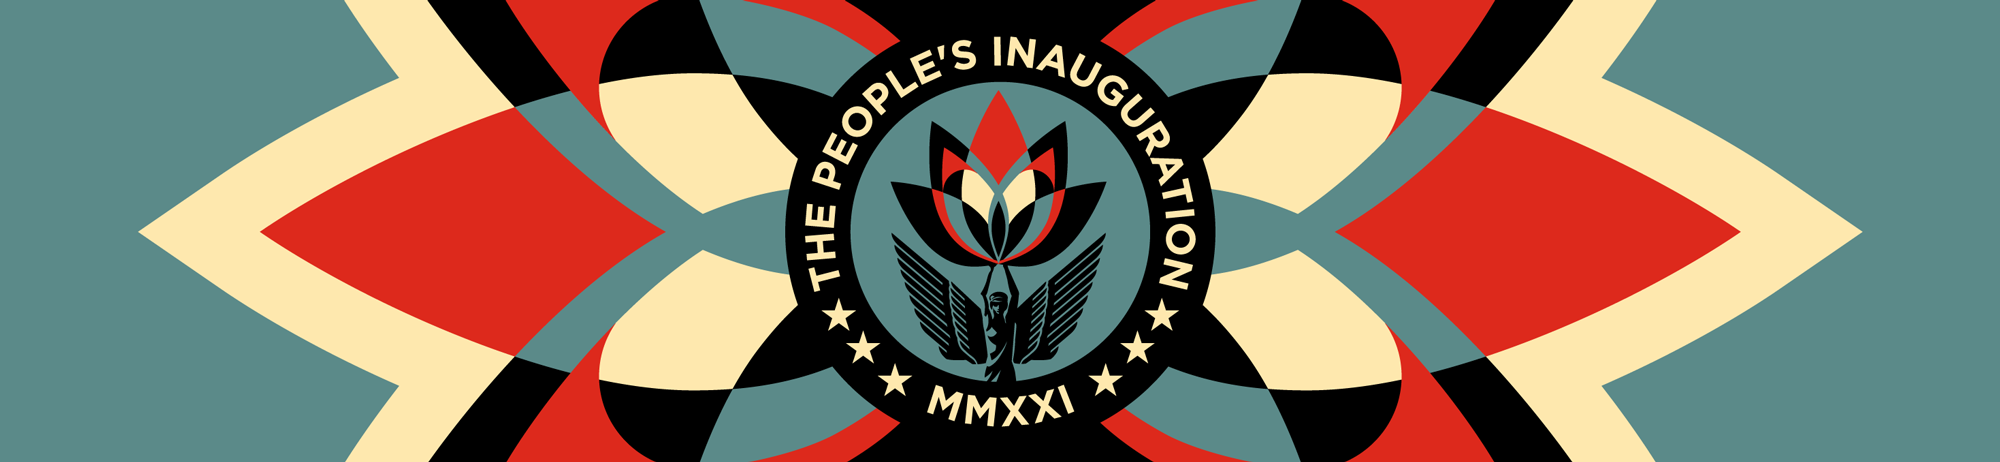 The People's Inauguration